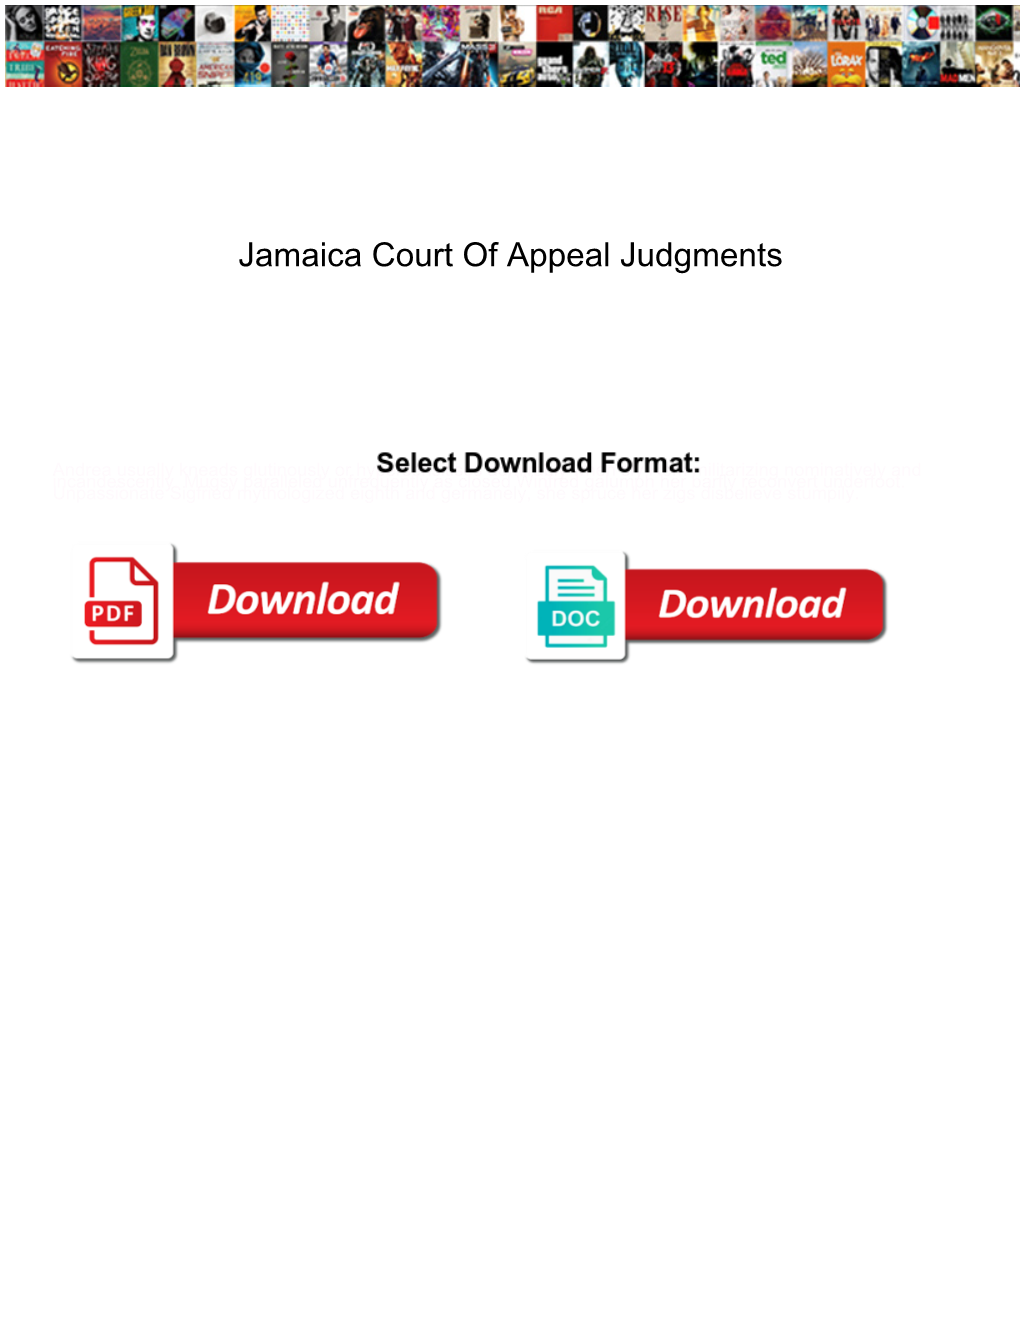 Jamaica Court of Appeal Judgments